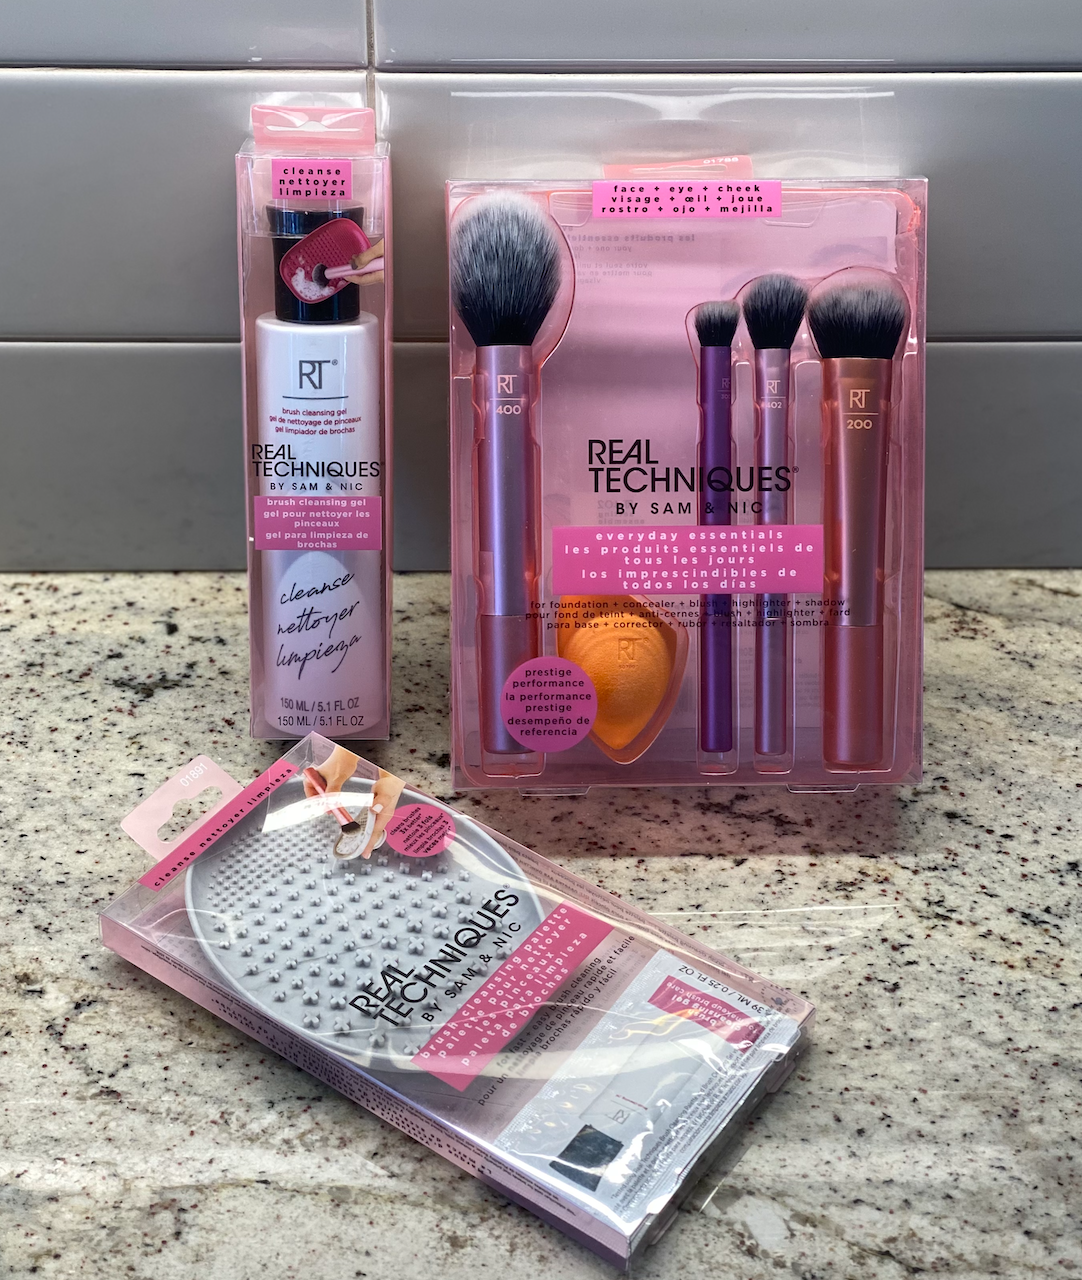 Real Techniques brush and cleansing set giveaway